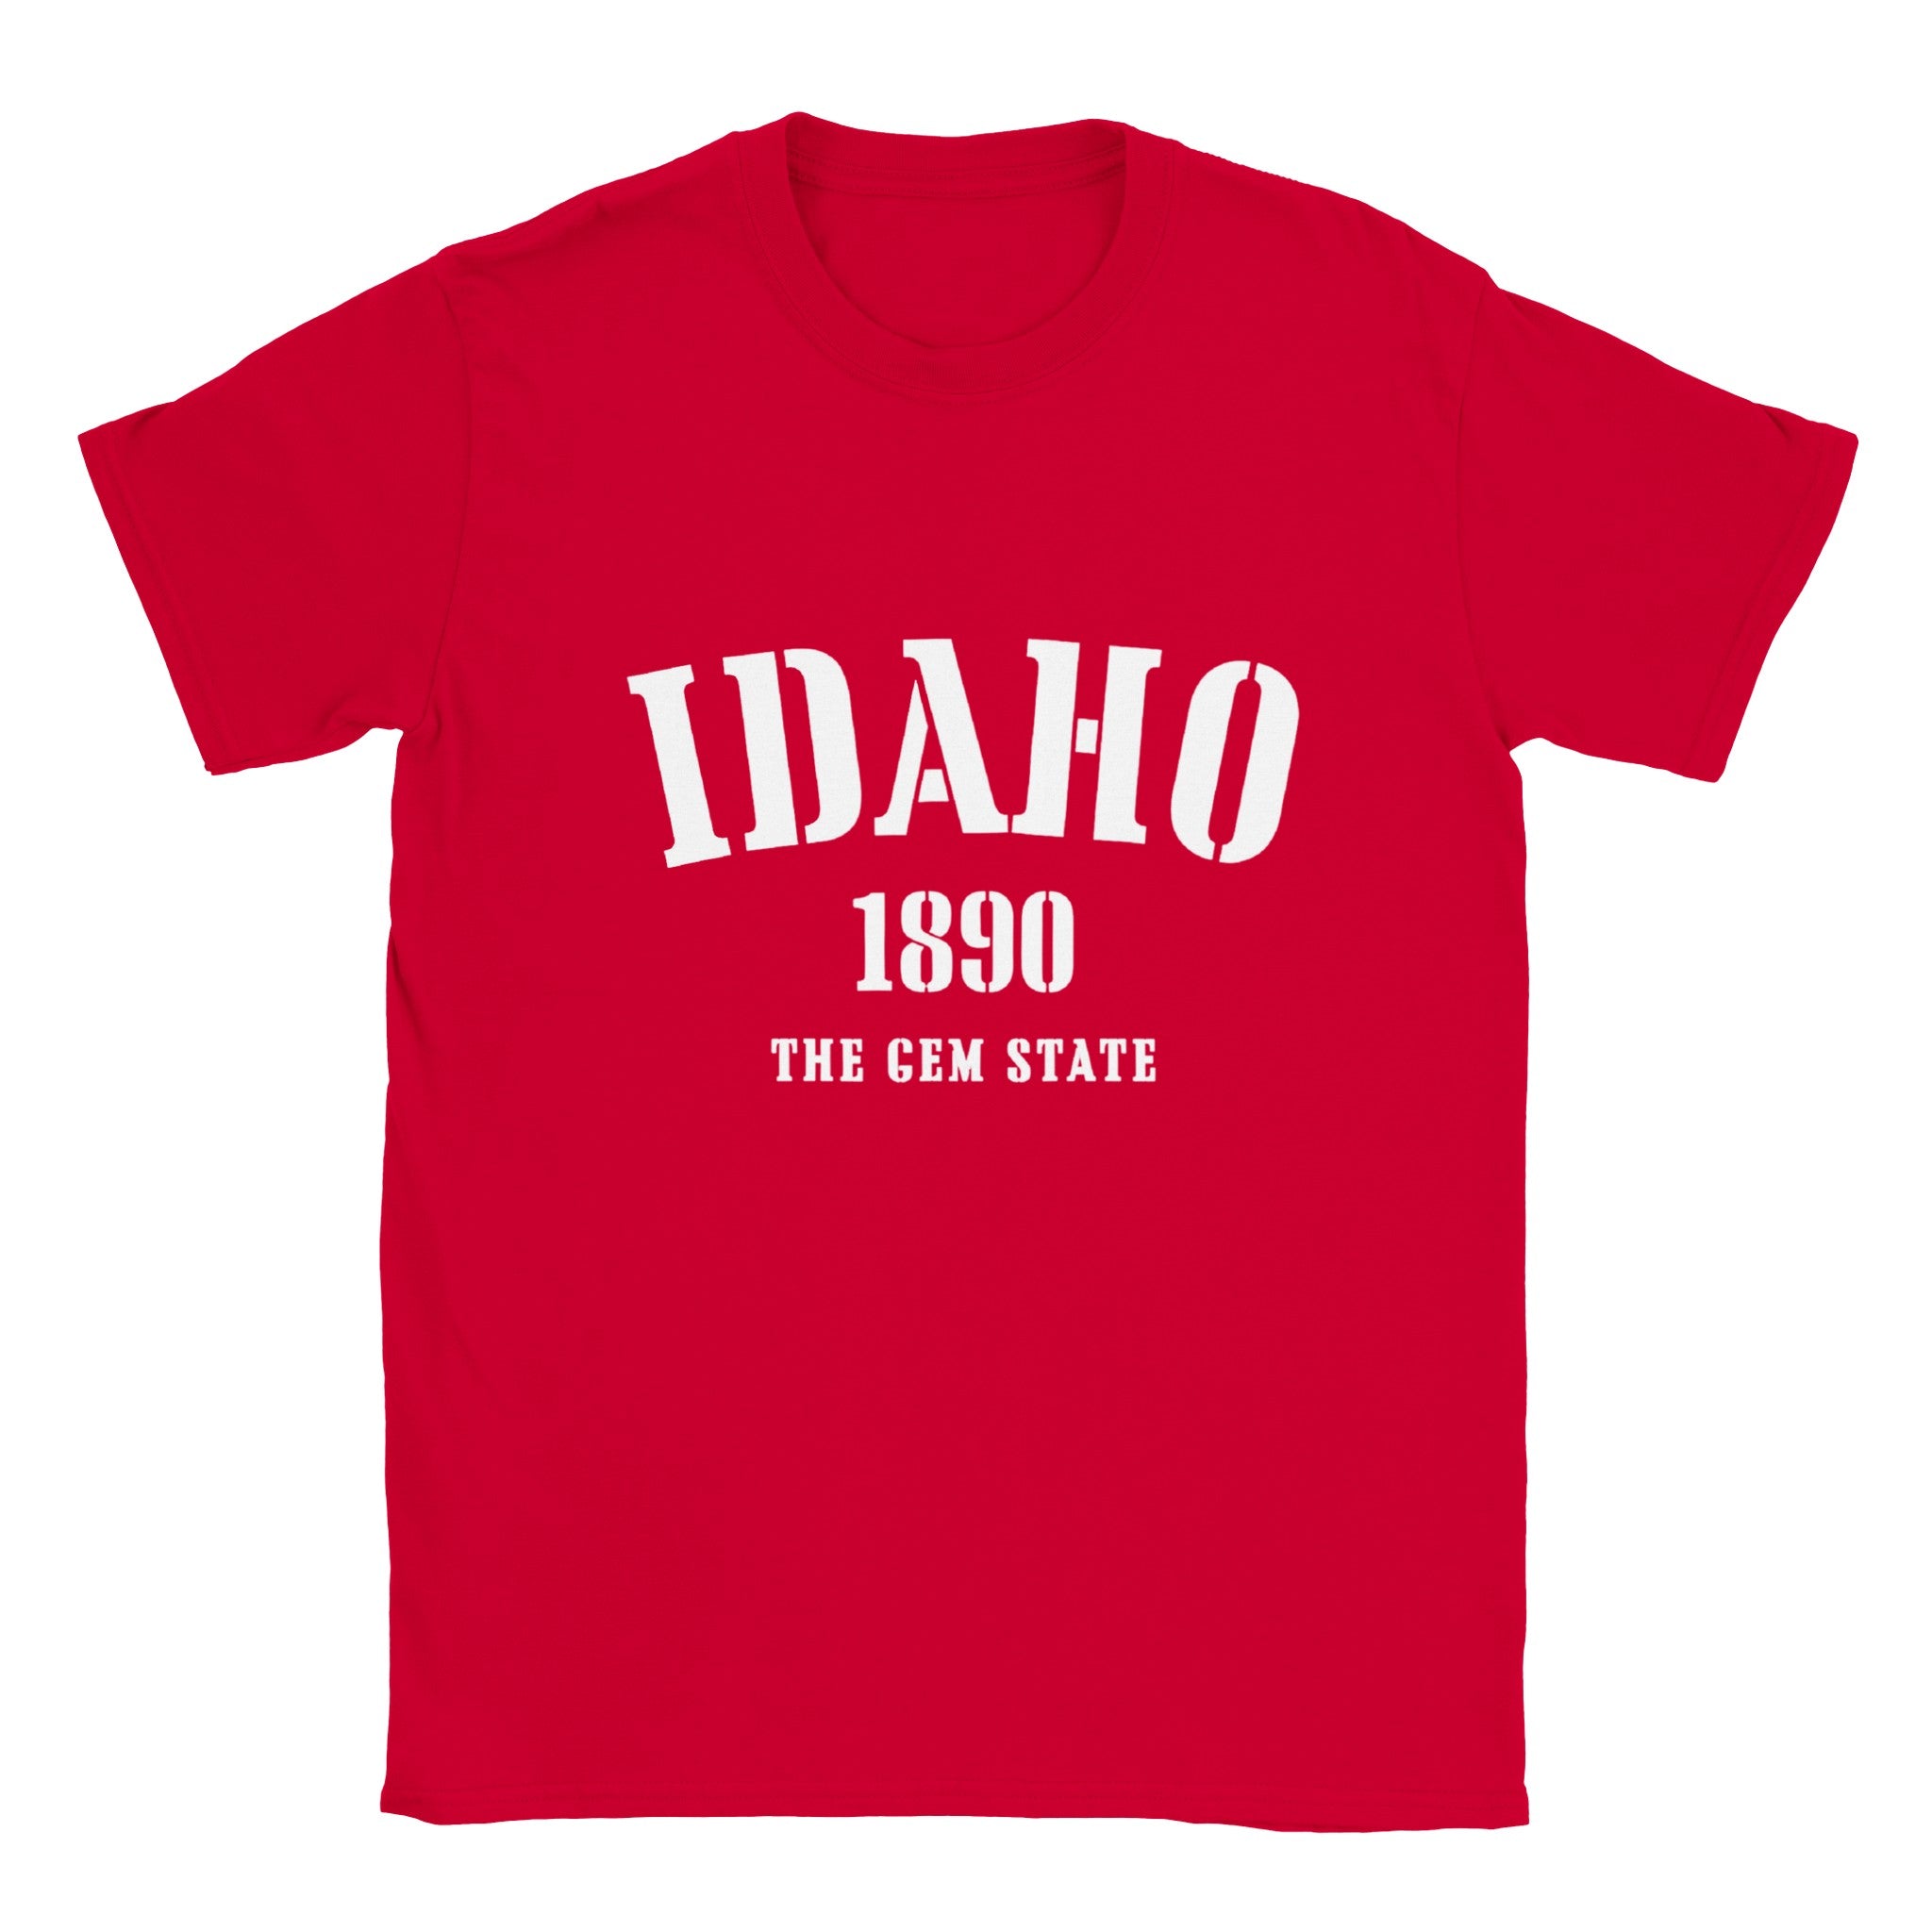 Idaho- Classic Unisex Crewneck States T-shirt - Creations by Chris and Carlos